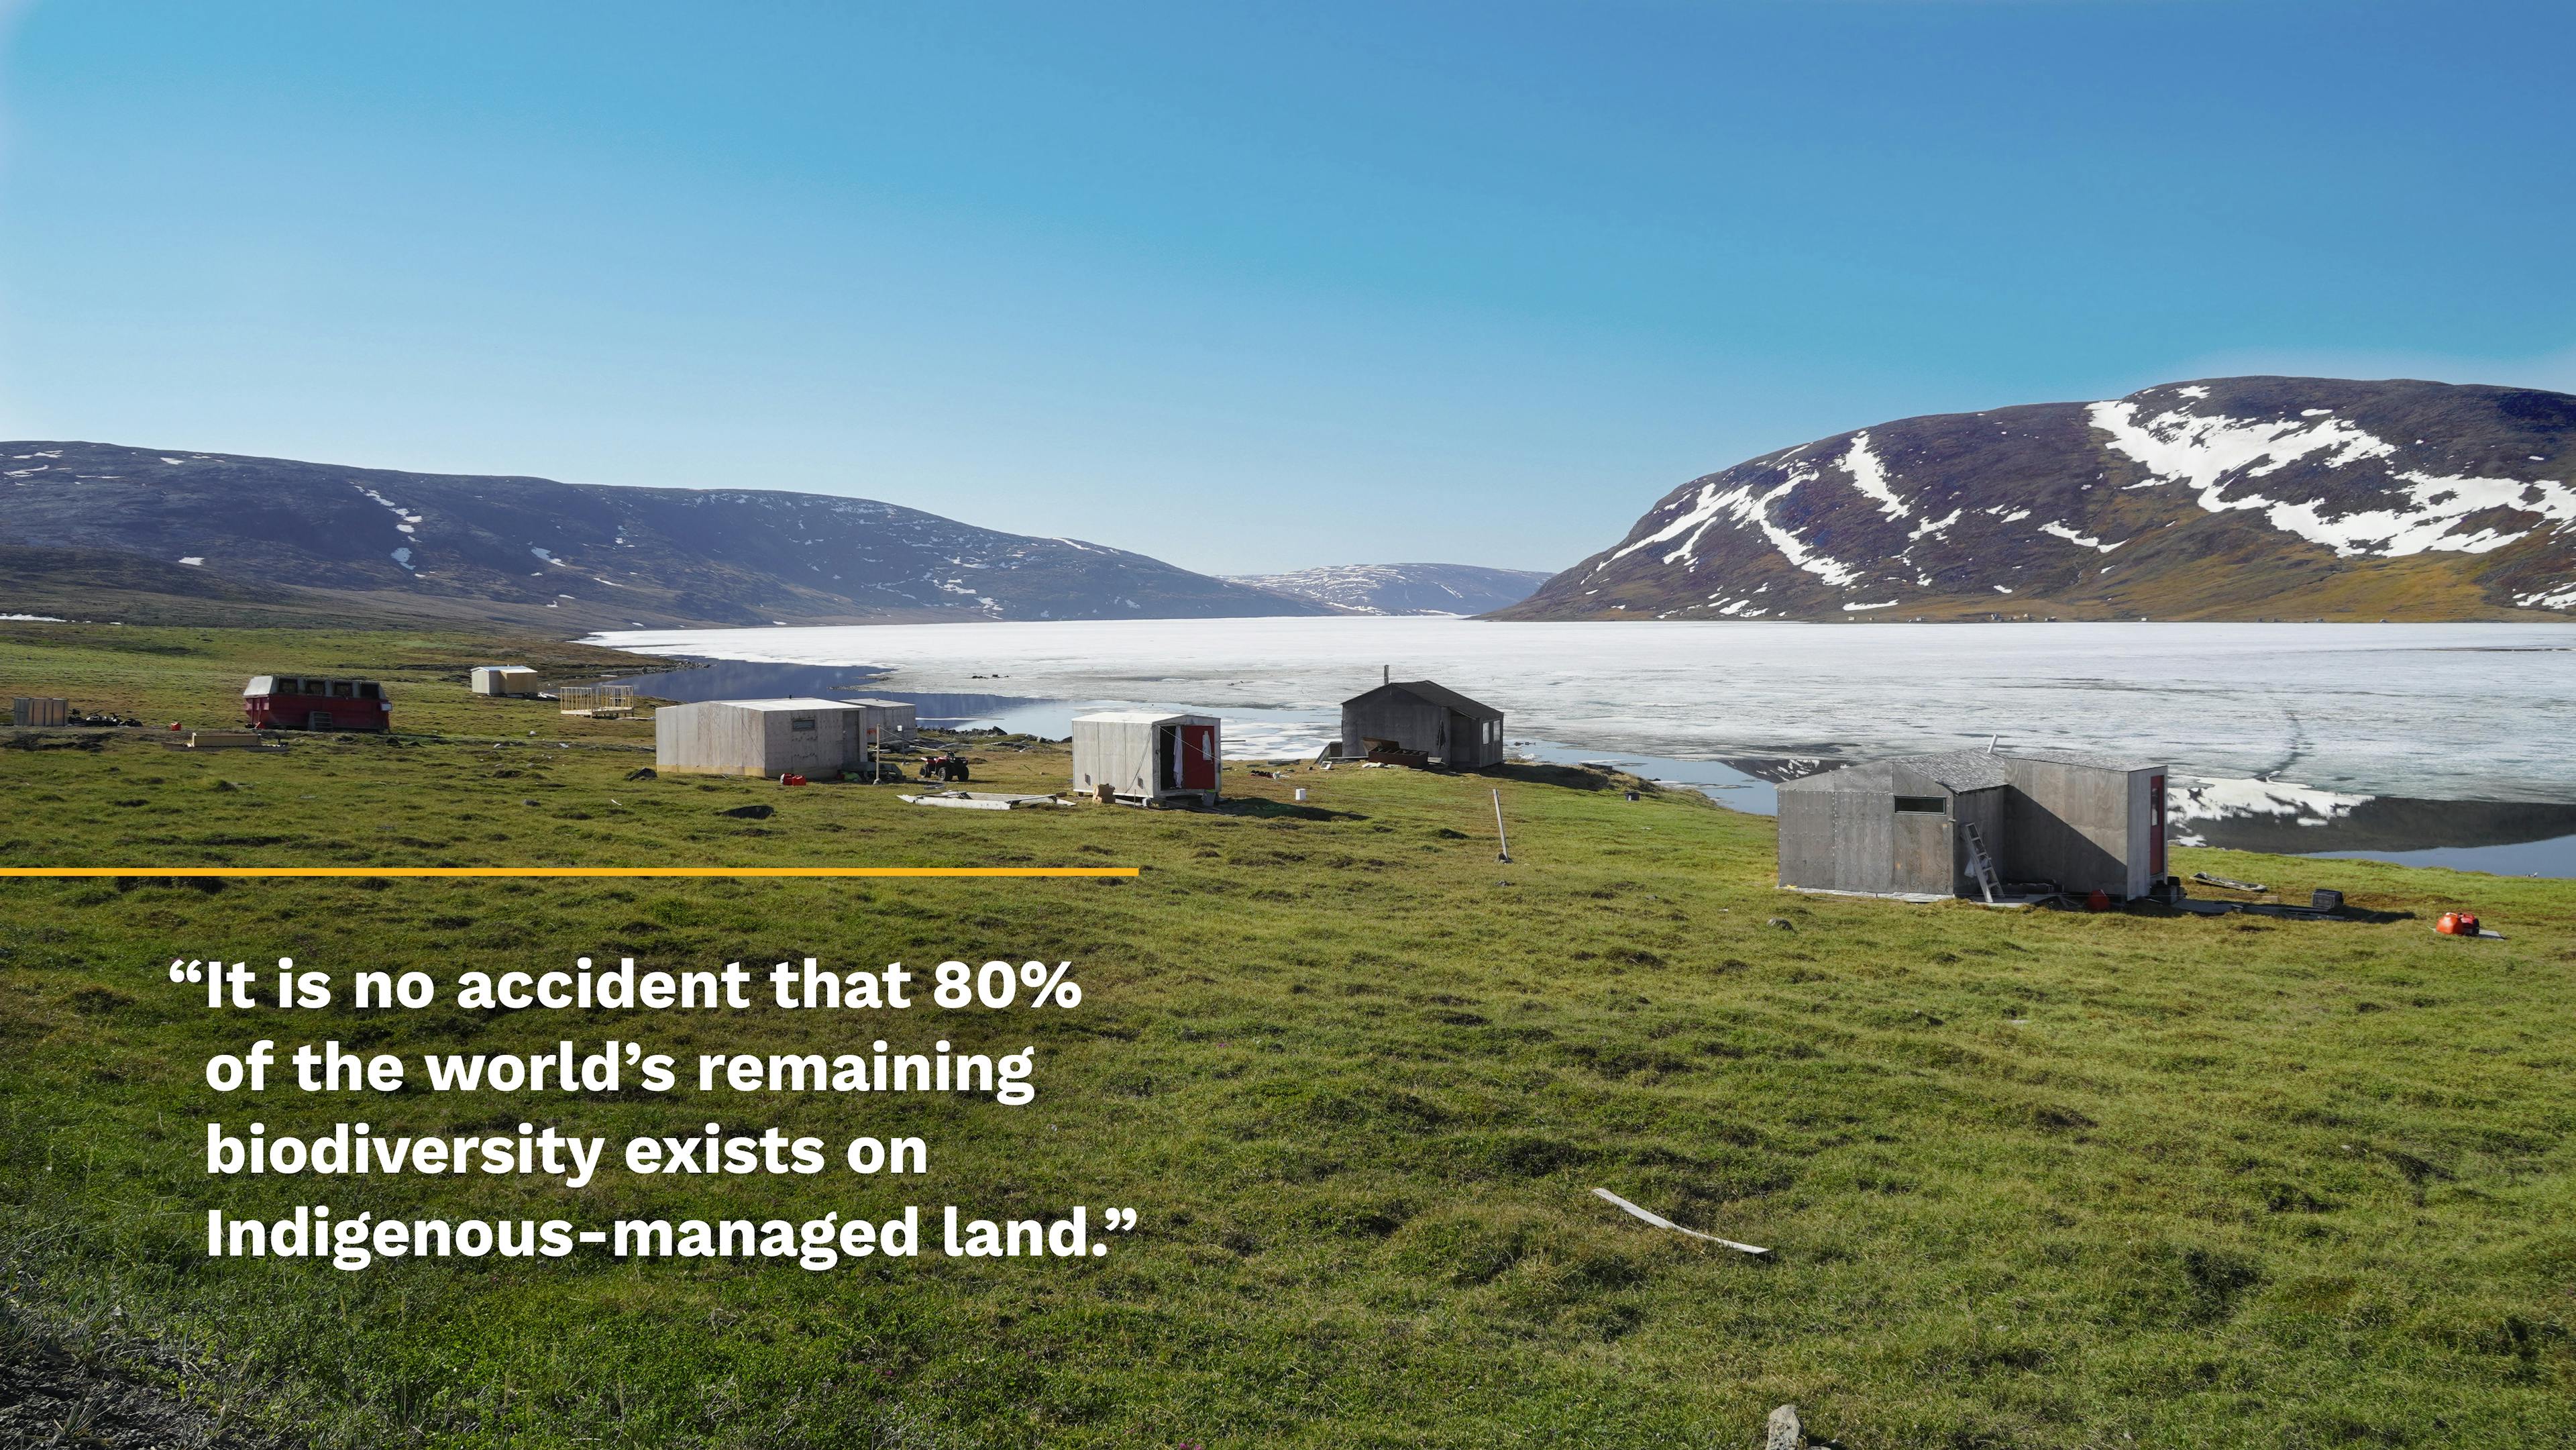 A small fishing community of six structures next to a large, melting body of water. Text on the images states "It is no accident that 80% of the world's remaining biodiversity exists on Indigenous-managed land."